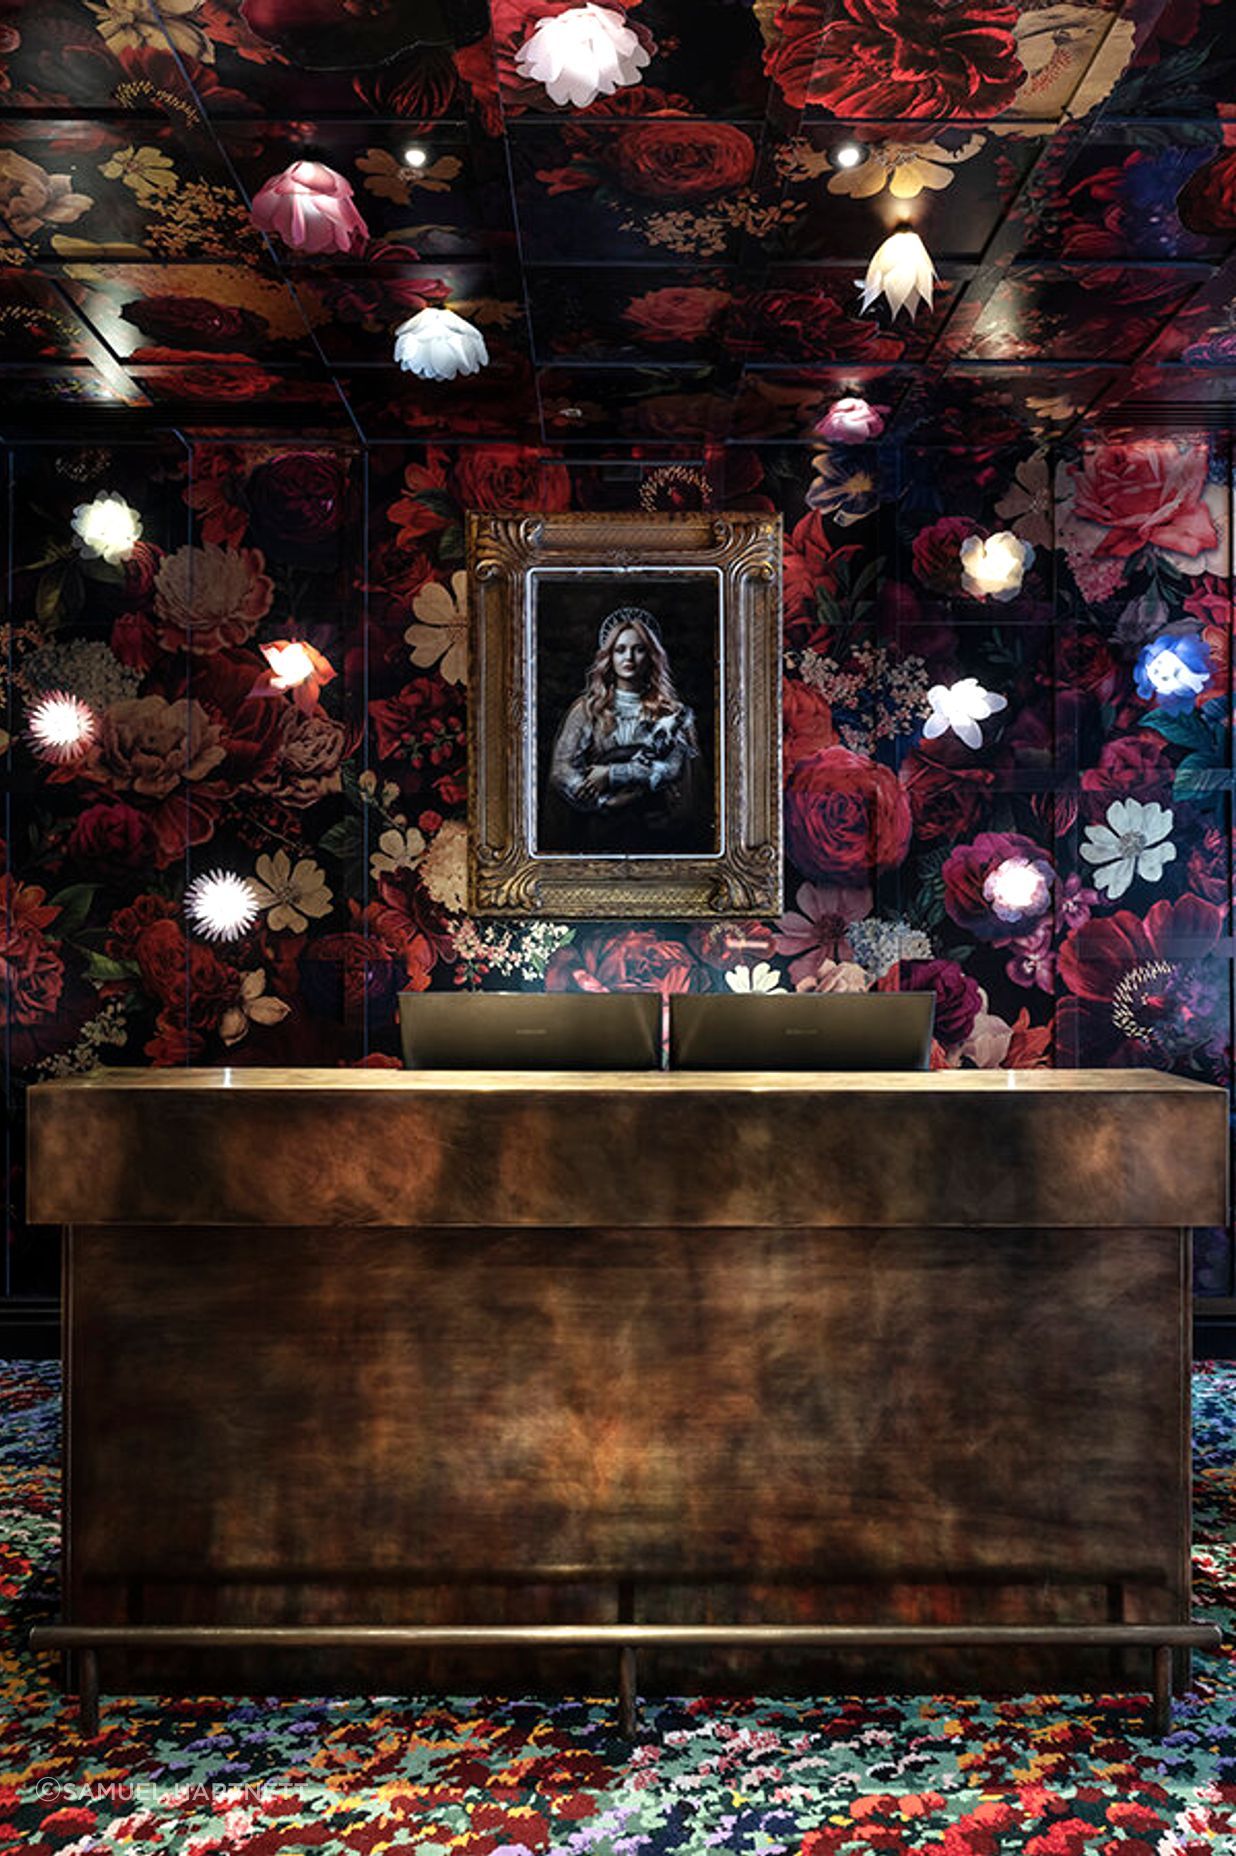 Material Creative weaves a tale from the moment guests step into reception, with rugs based on artwork by Karl Maughan by Designer Rugs. The floral and gold leaf wall mural was created by Haley Brown of The Art Dept and the photograph is by Ross Brown.